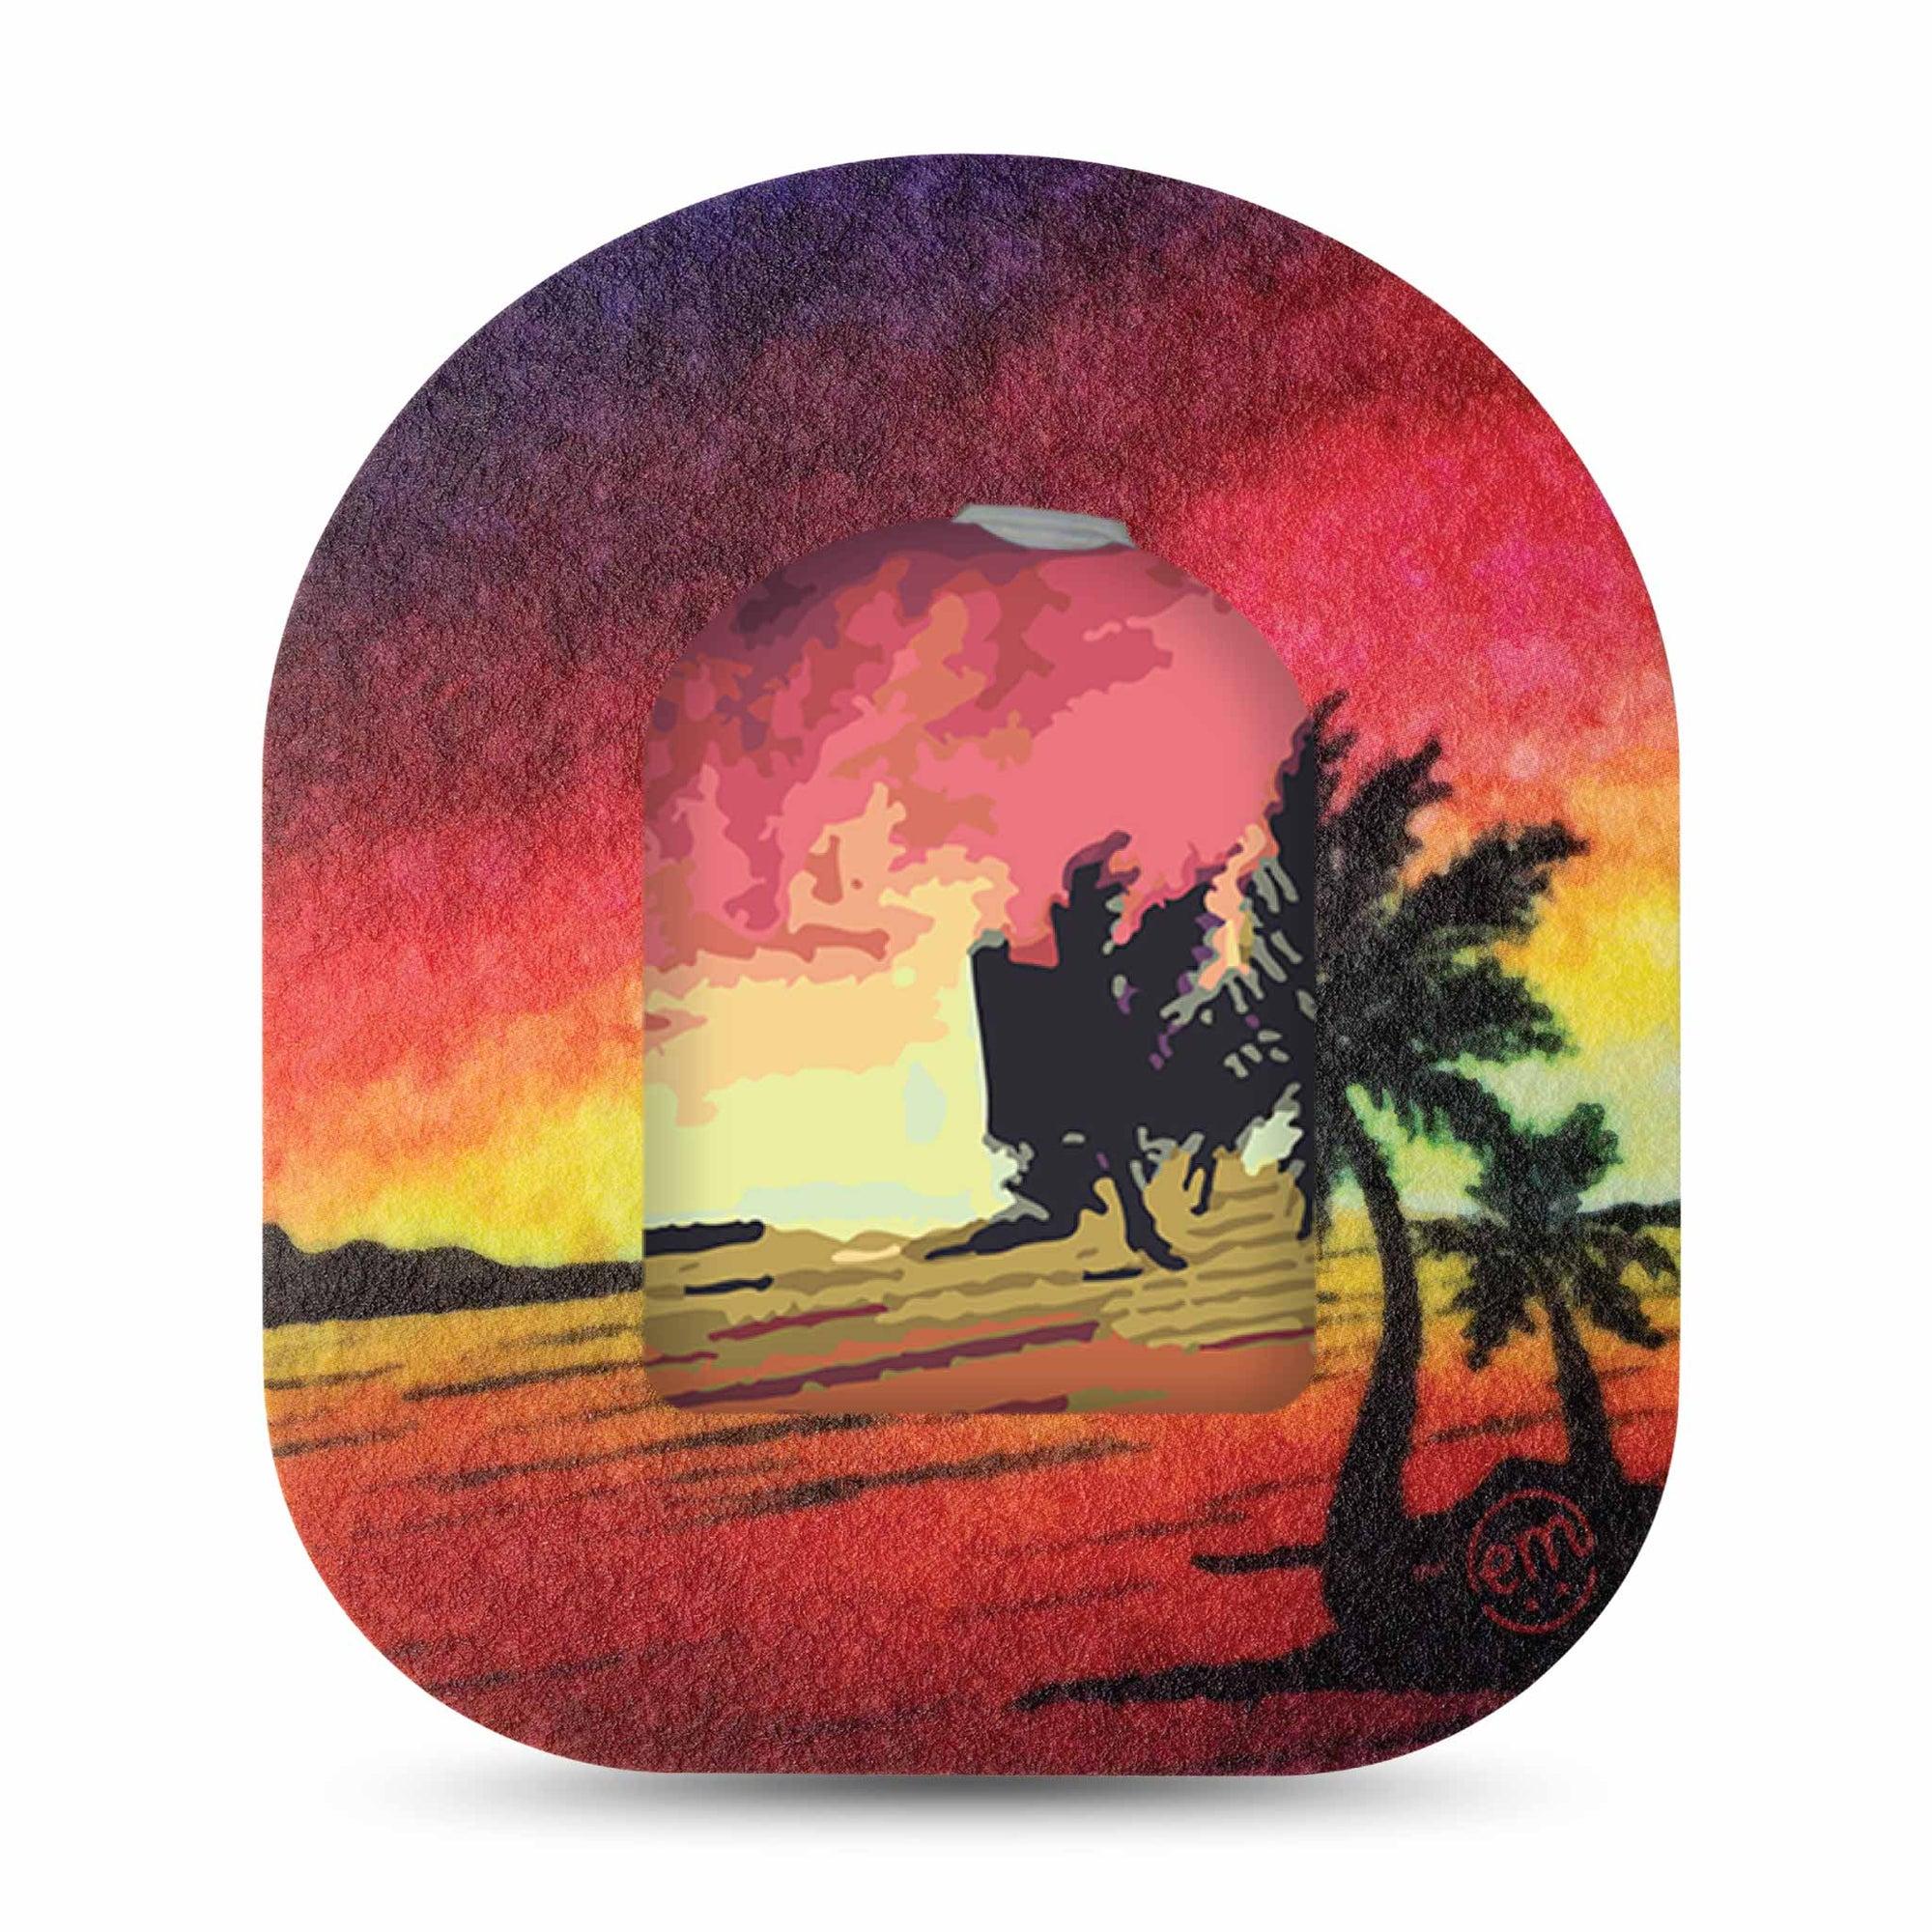 ExpressionMed Sunset Omnipod Full Wrap Center Sticker and Mini Tape Summer Sunset Themed Vinyl Sticker and Tape Design Pump Design